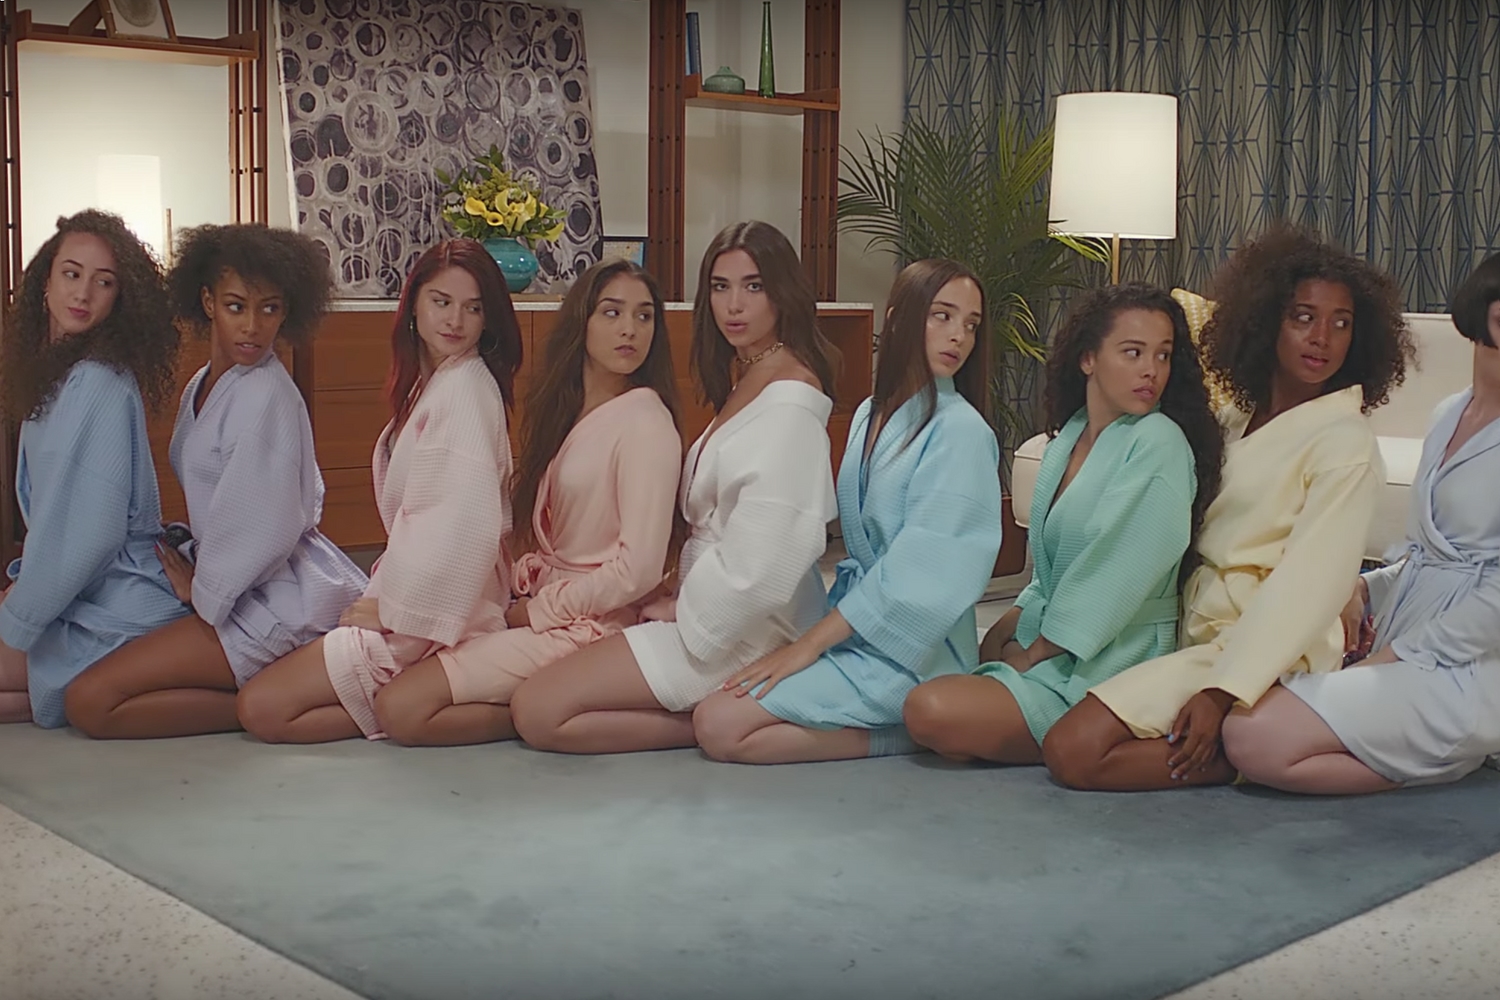 Dua Lipa goes to Miami in her ‘New Rules’ video